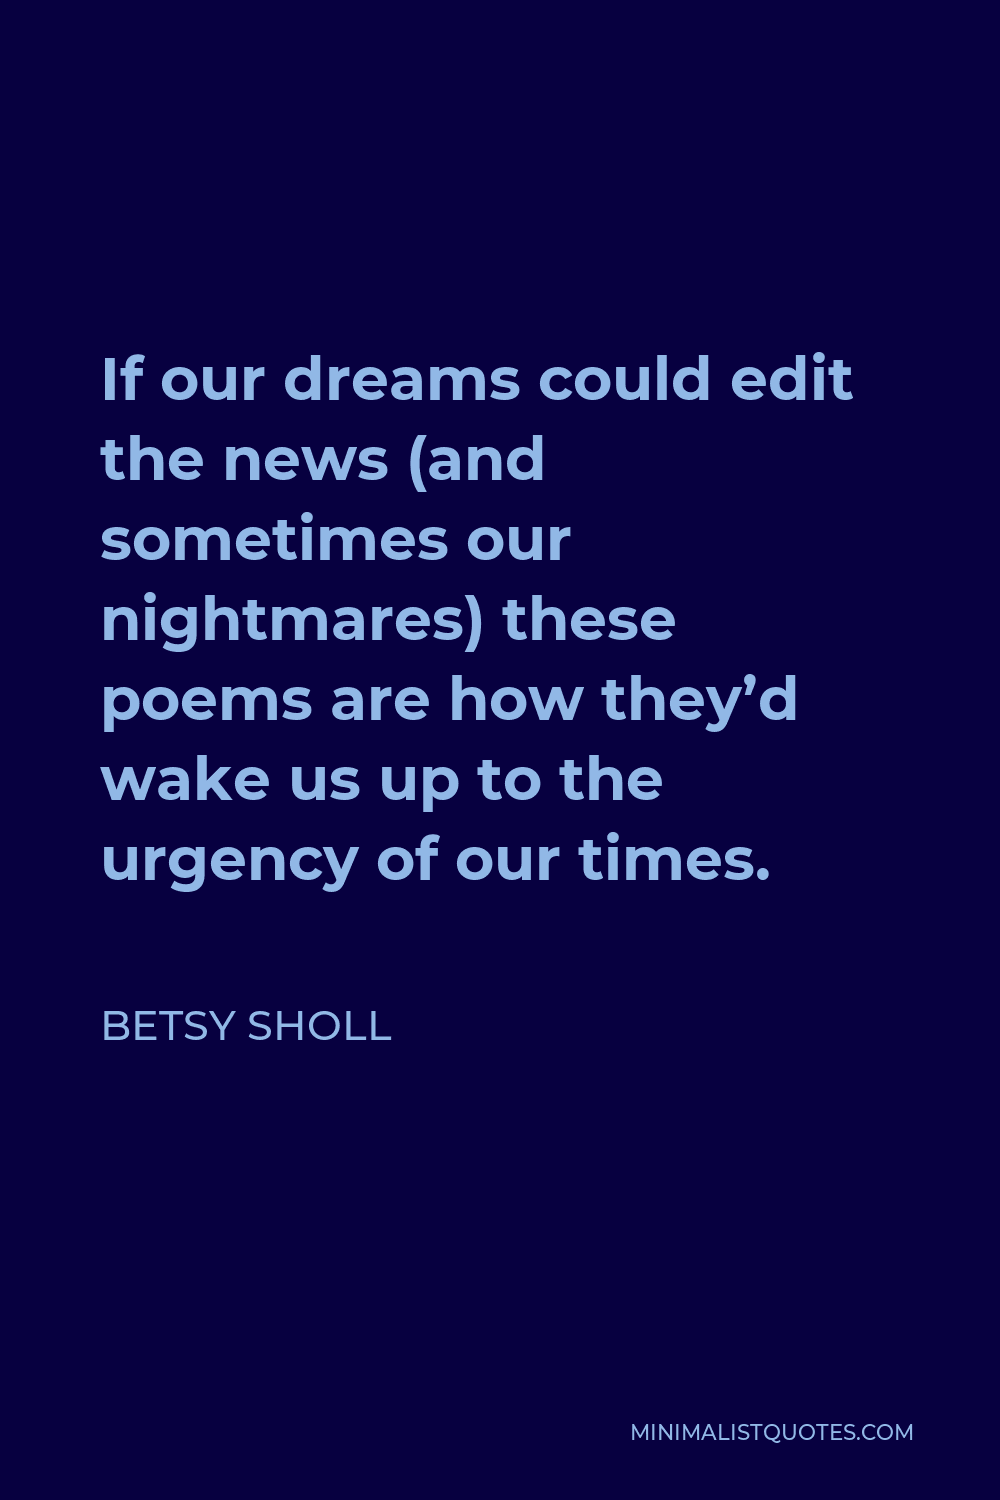 Betsy Sholl Quote - If our dreams could edit the news (and sometimes our nightmares) these poems are how they’d wake us up to the urgency of our times.